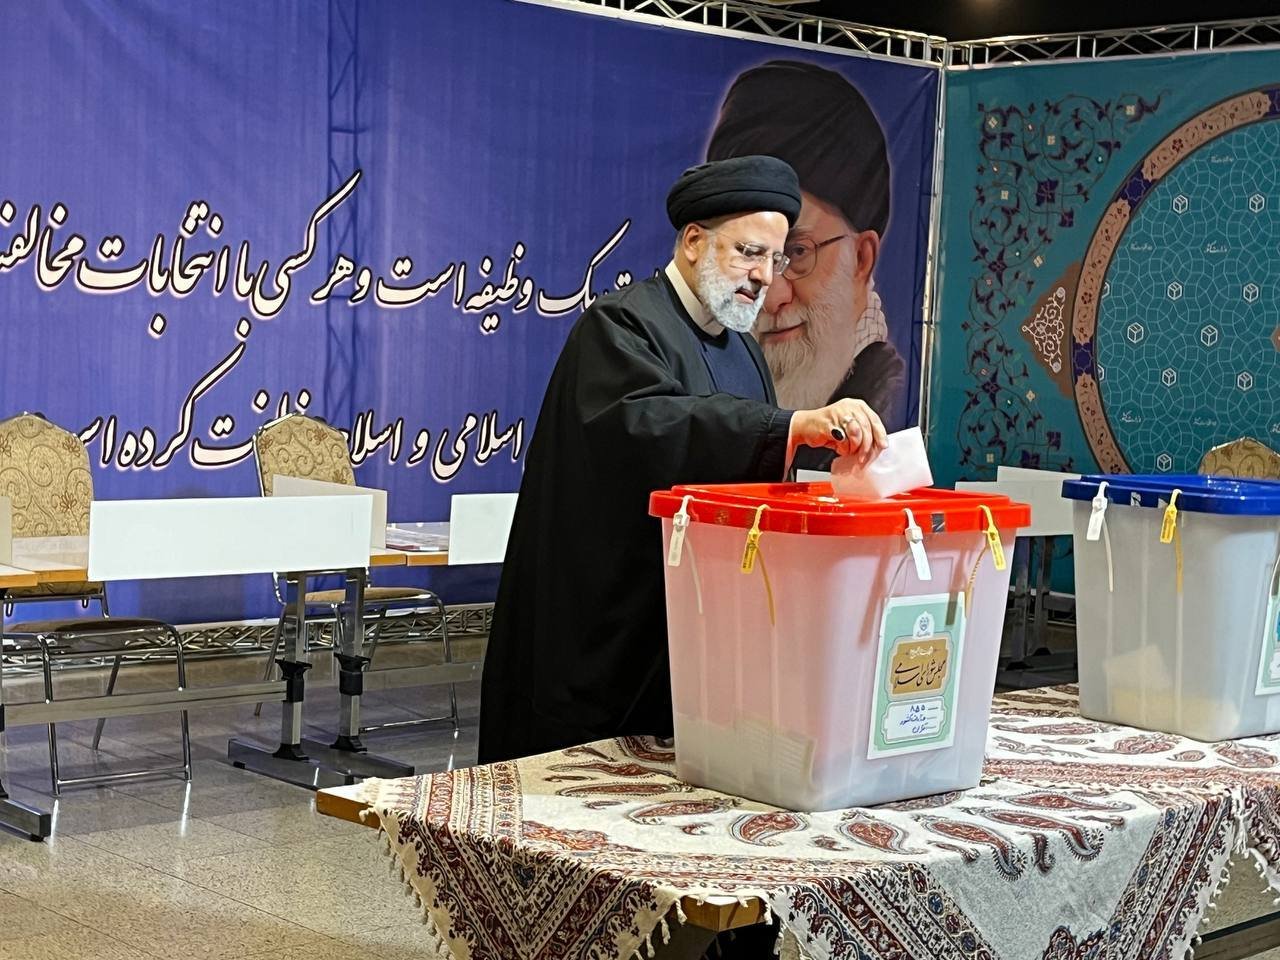 President of Iran casts his ballot in election